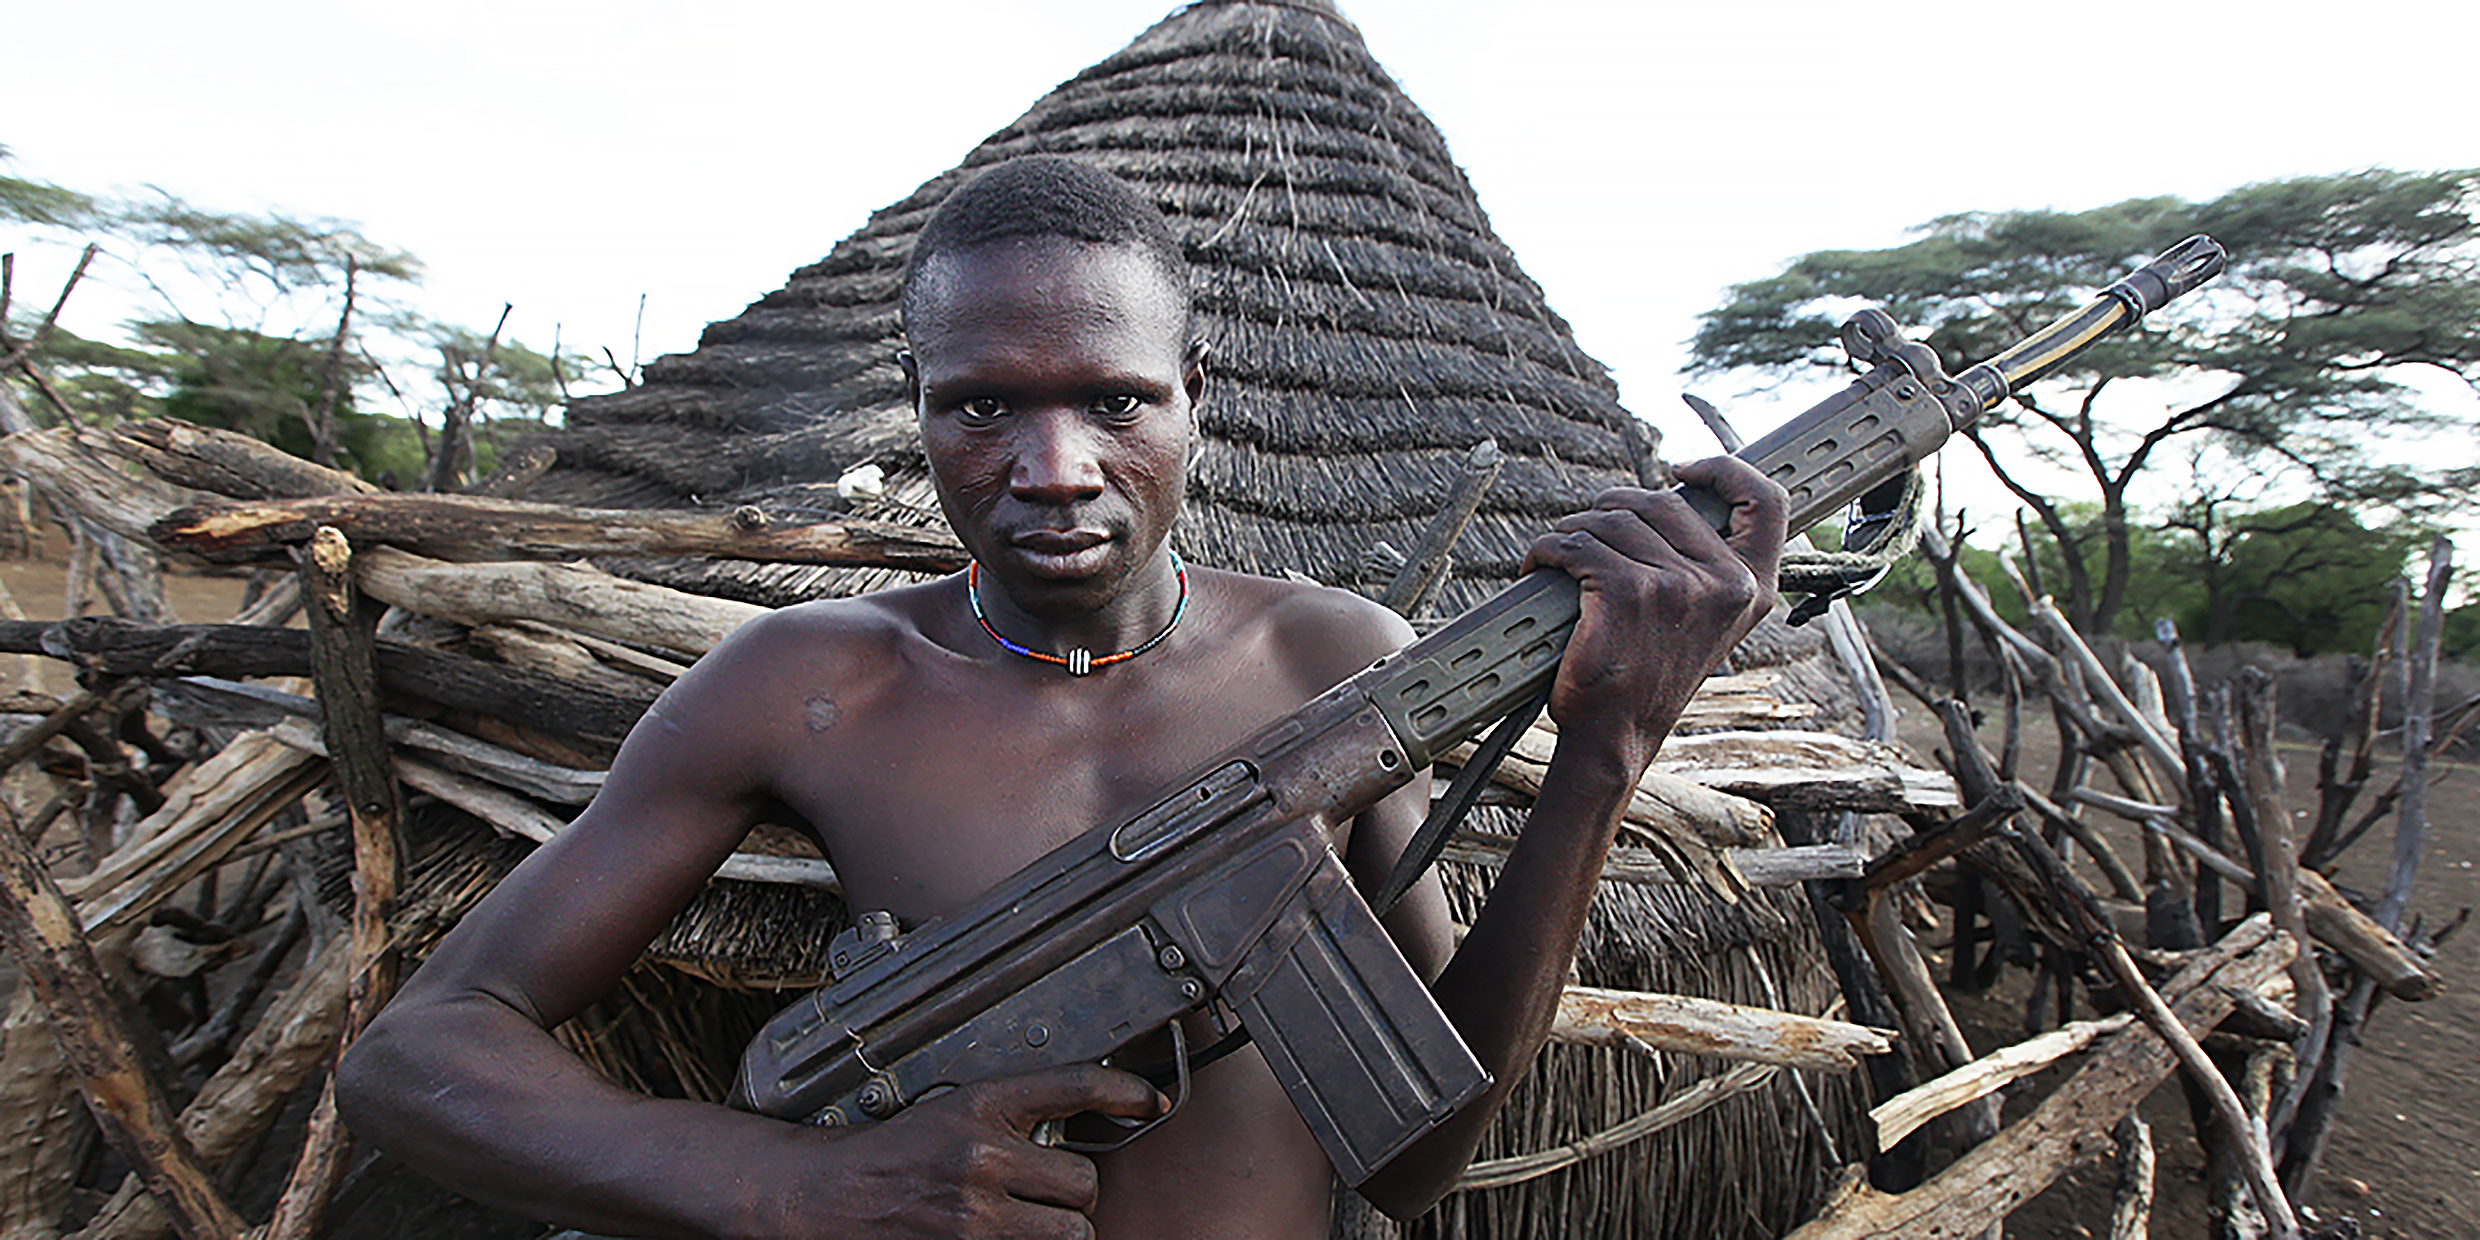 Image of a young Sudanese man posing with an automatic rifle